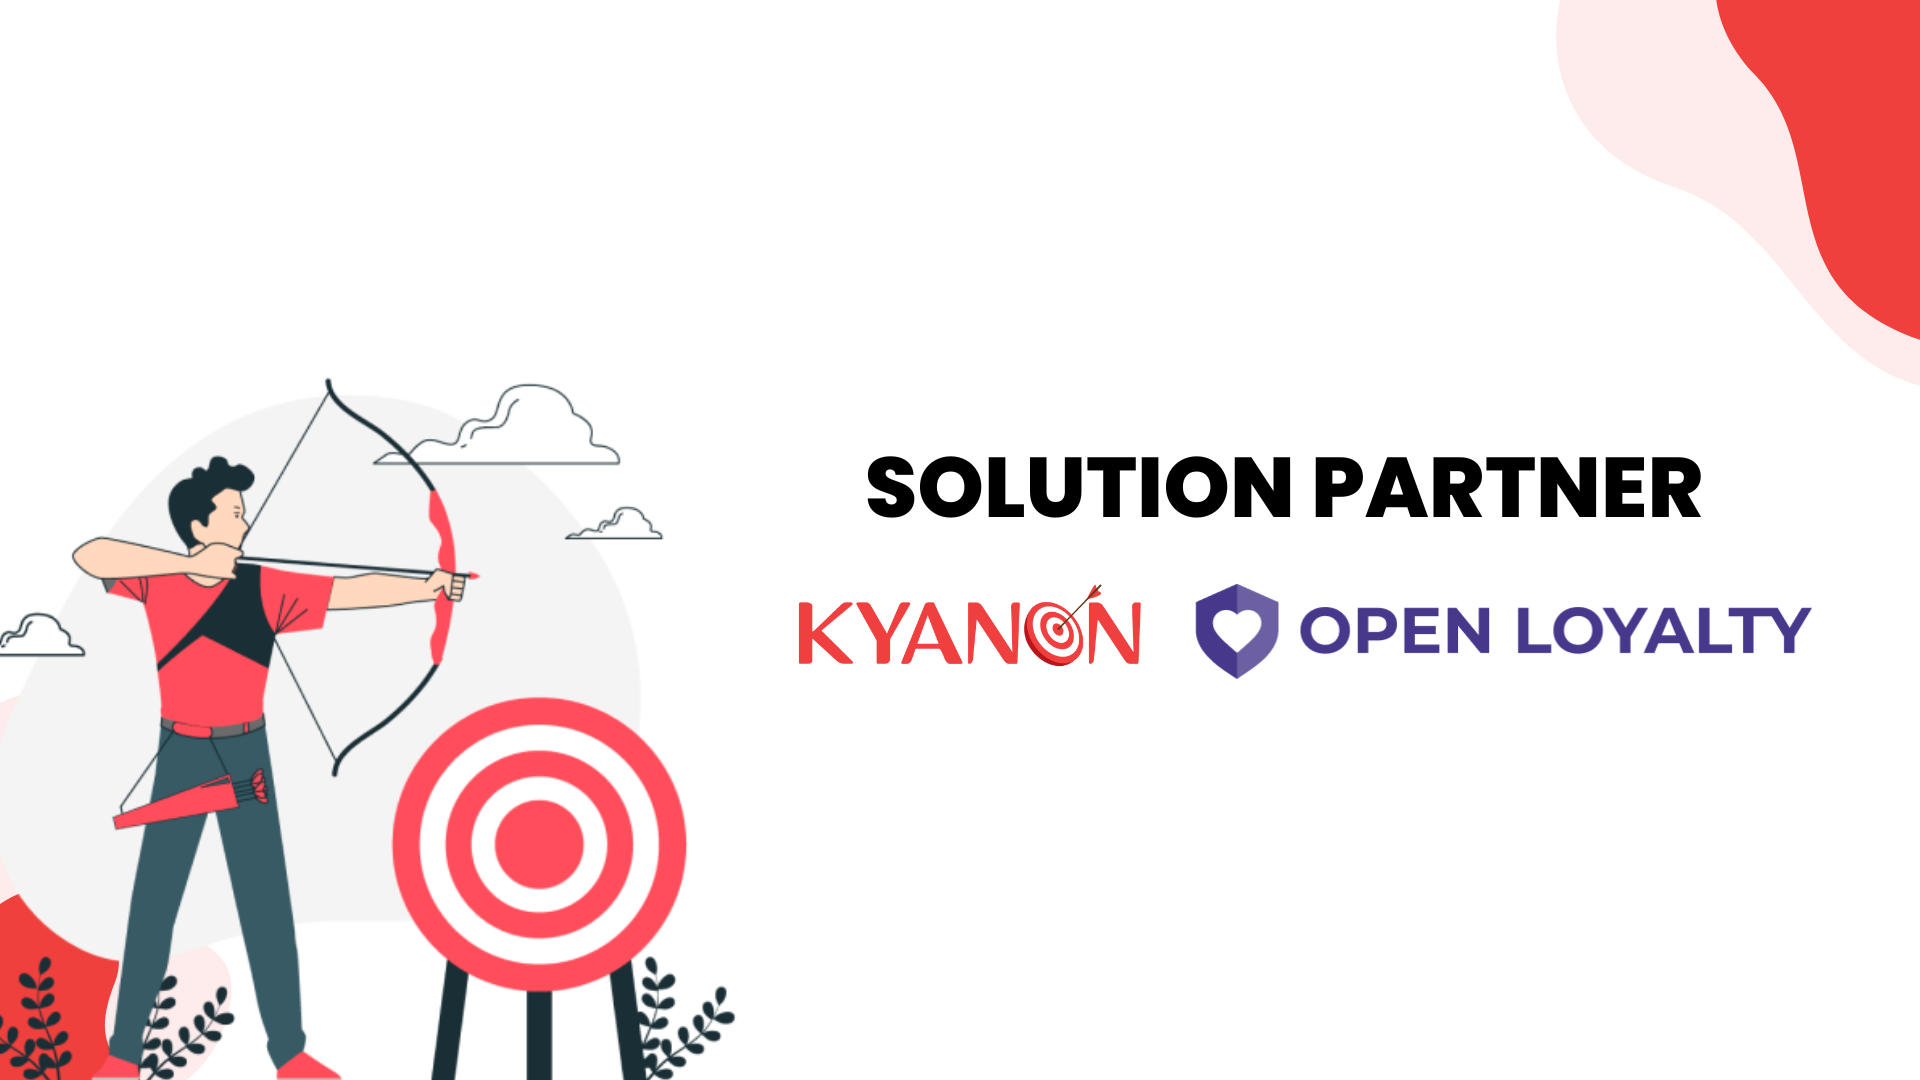 Kyanon Digital Is A Solution Partner With Open Loyalty